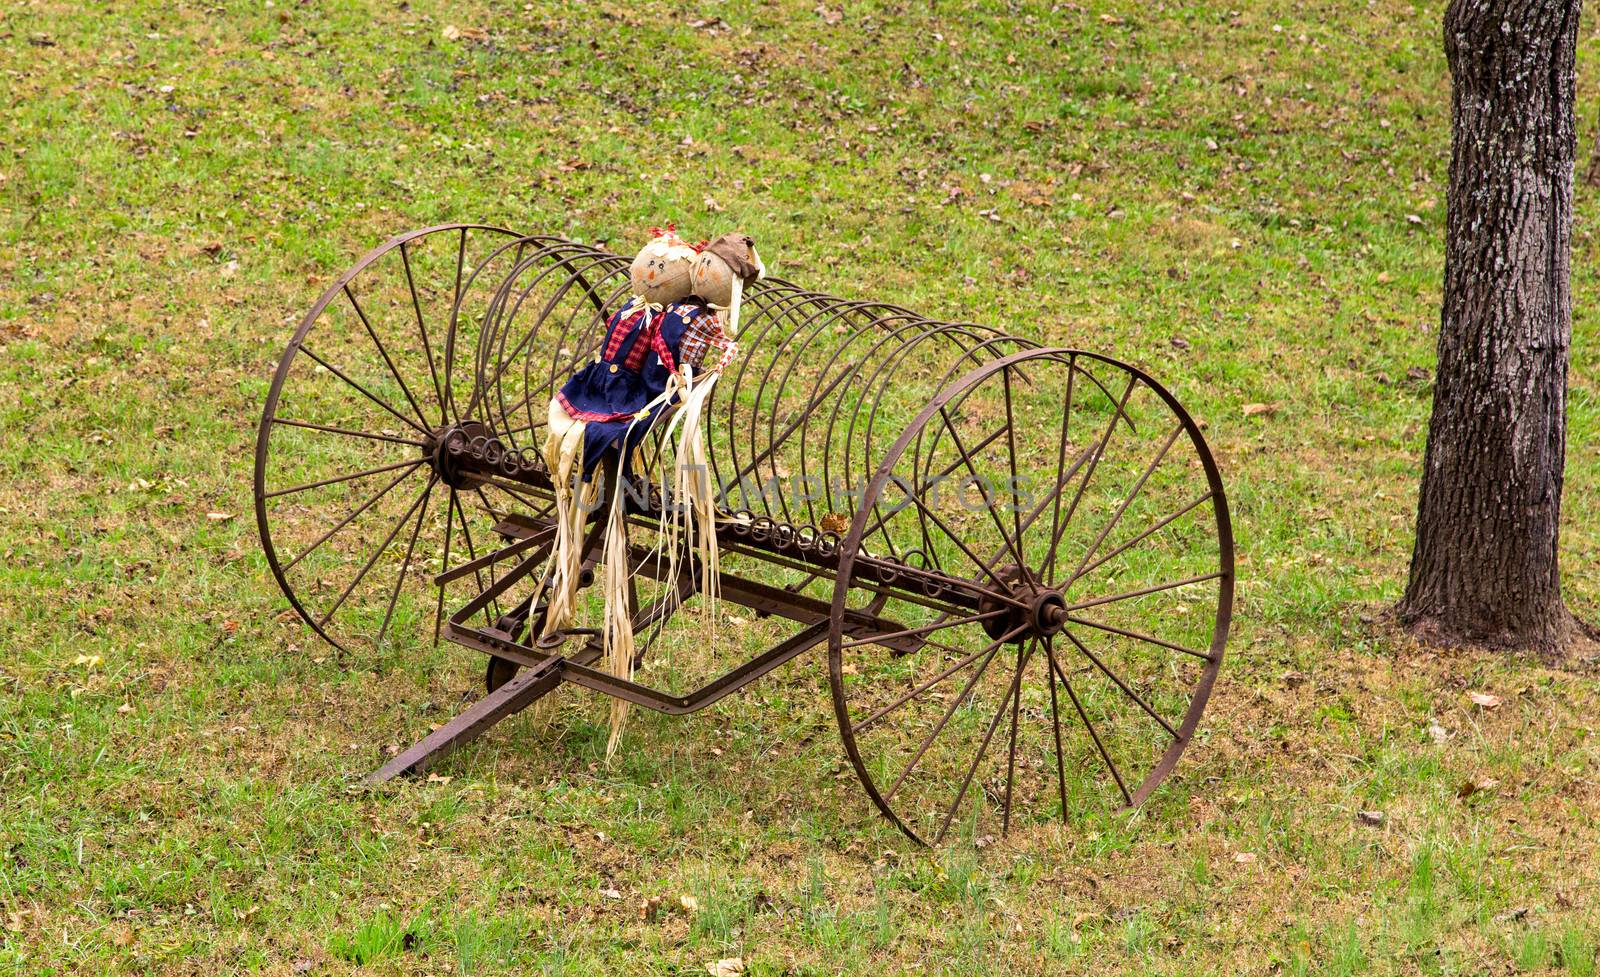 This doll couple on the old farm equipment represent the Autumn season arriving in North Carolina.